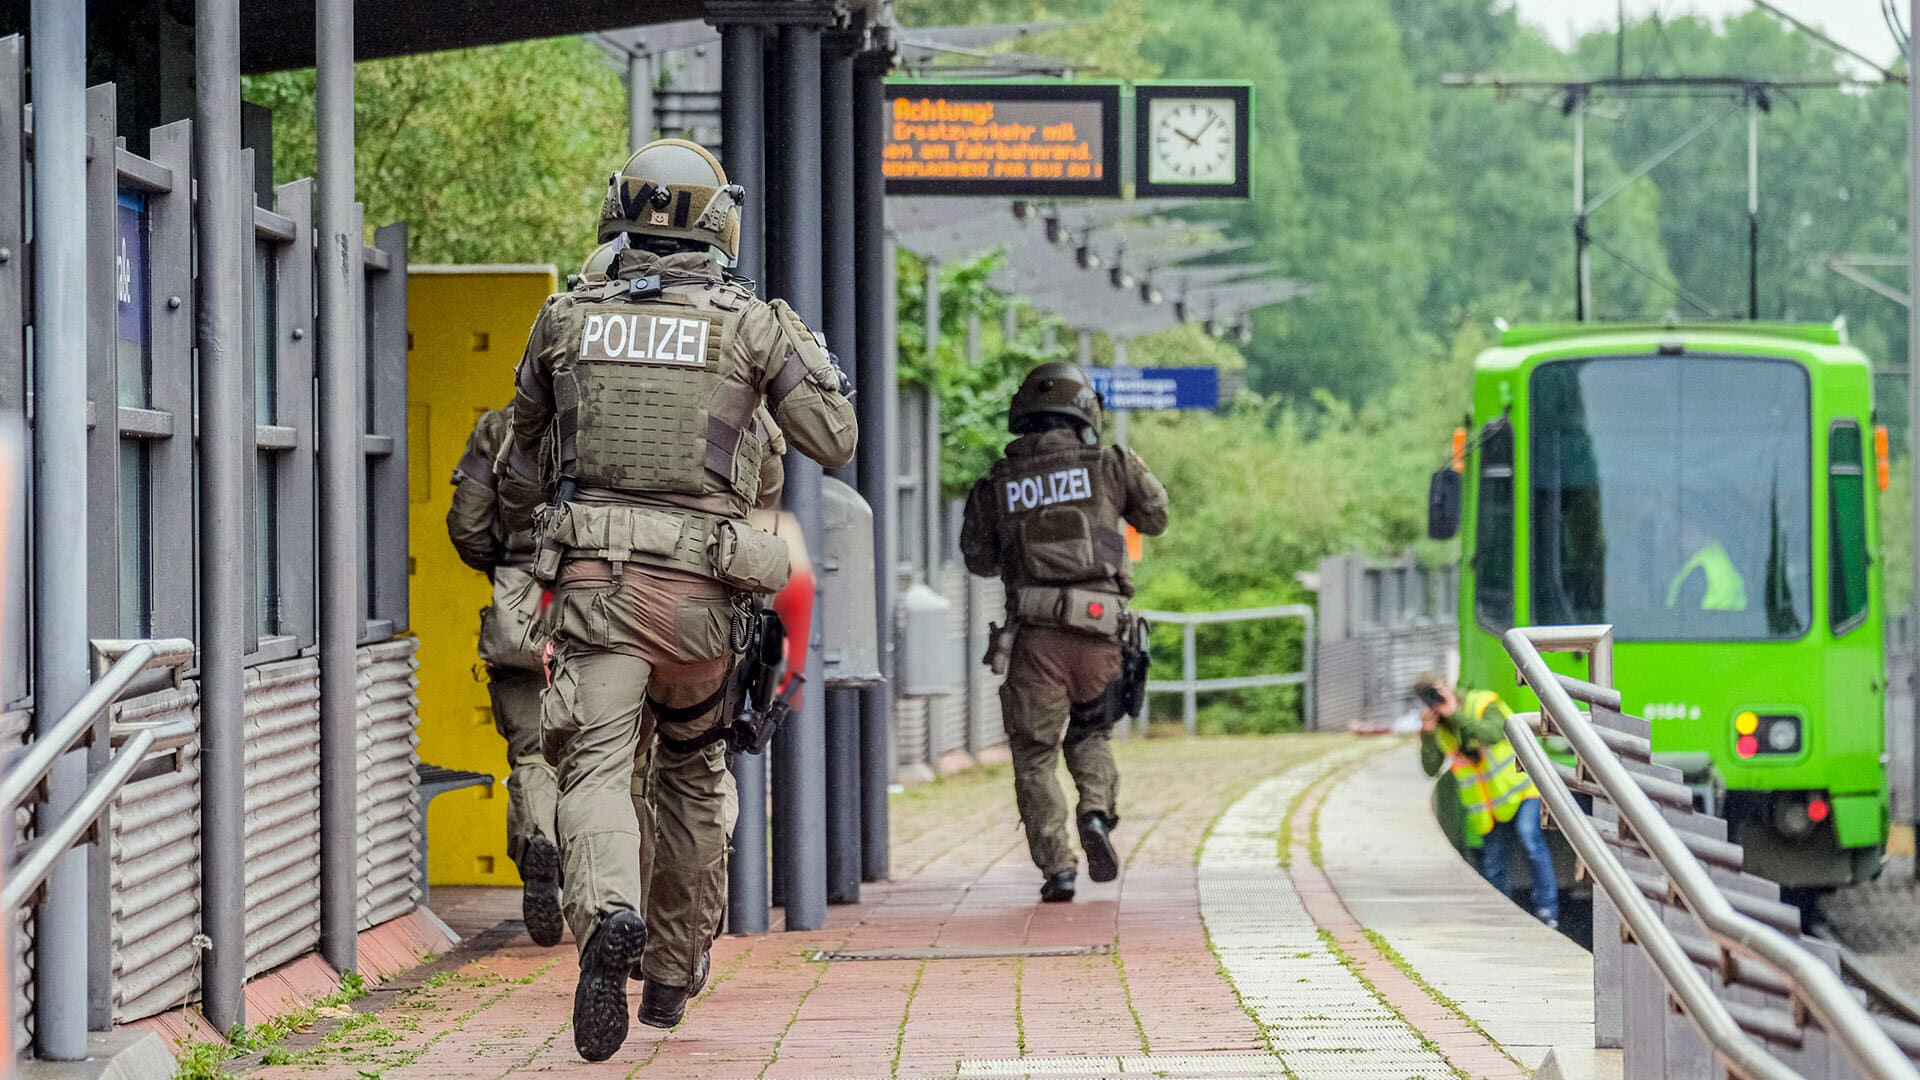 A counterterrorism unit from the state of Lower Saxony conducts a training operation in Hanover, Germany in July.